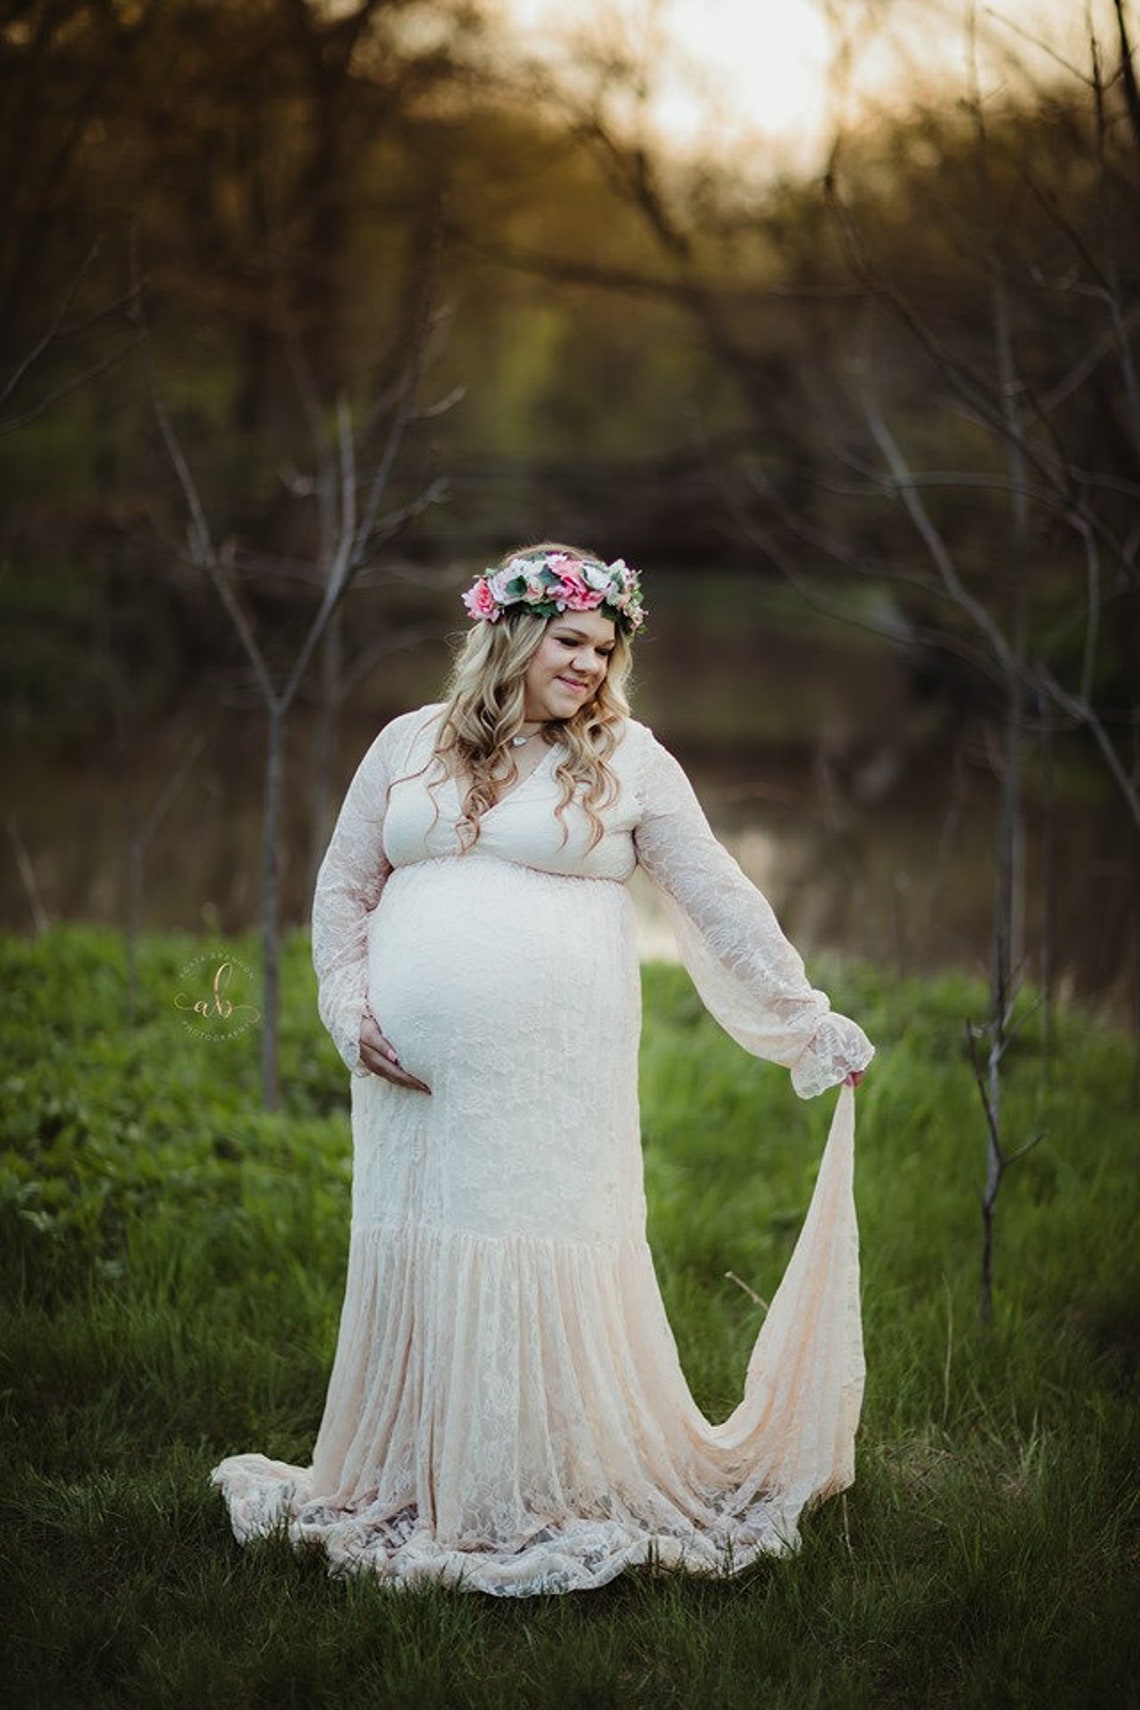 Plus Size Bohemian Lace Maternity Gown for Baby Shower Photo | Etsy